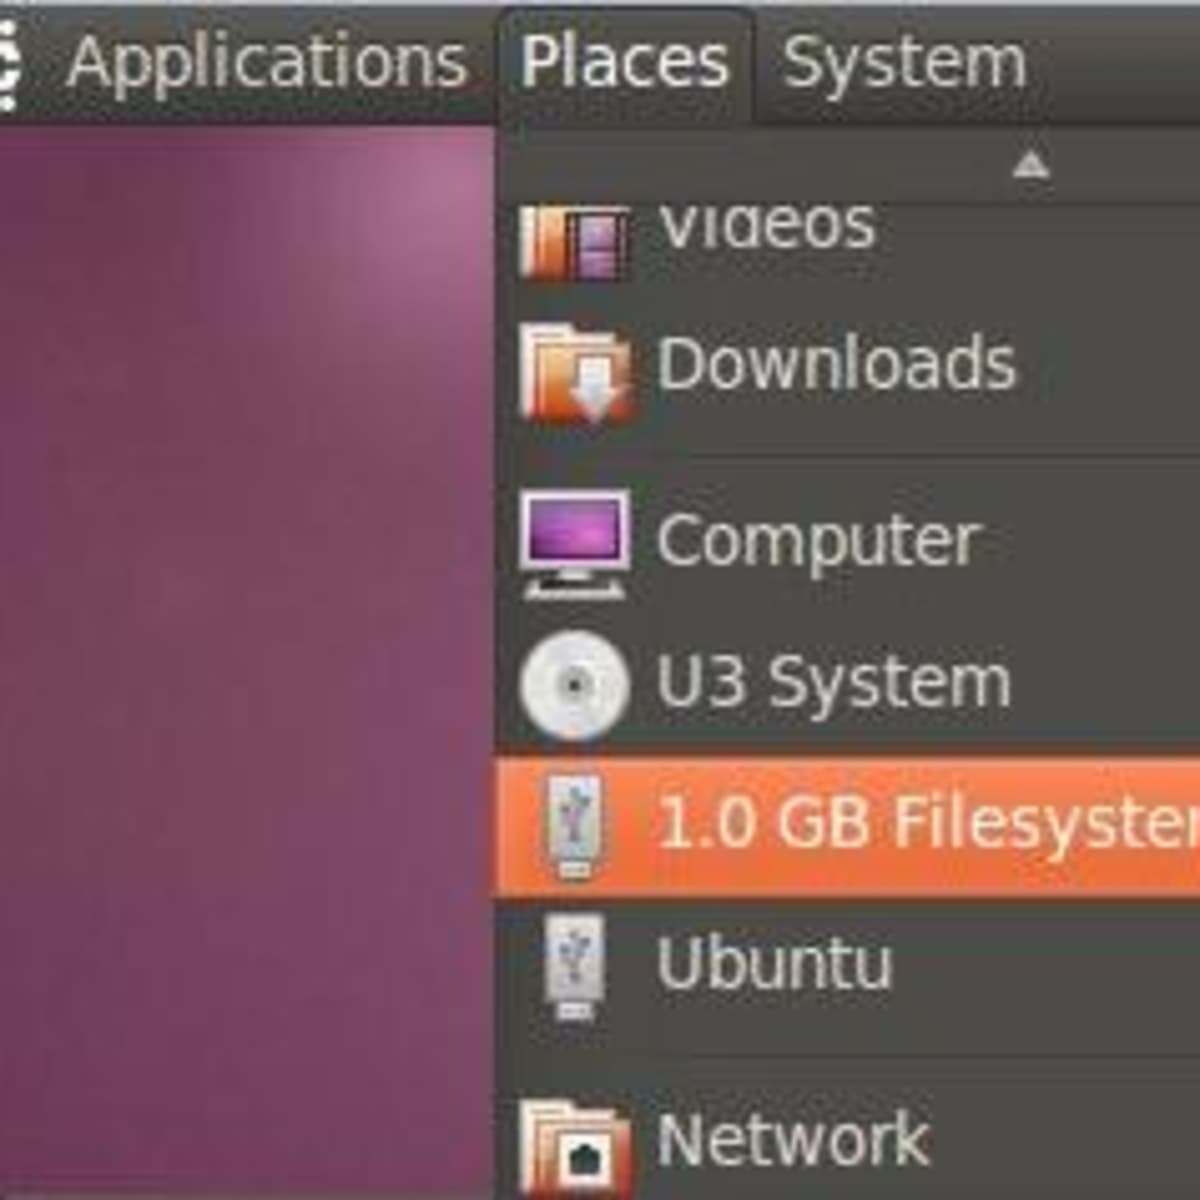 license Power cell Auroch How to Install Vodafone 3G USB Modem on Ubuntu - HubPages